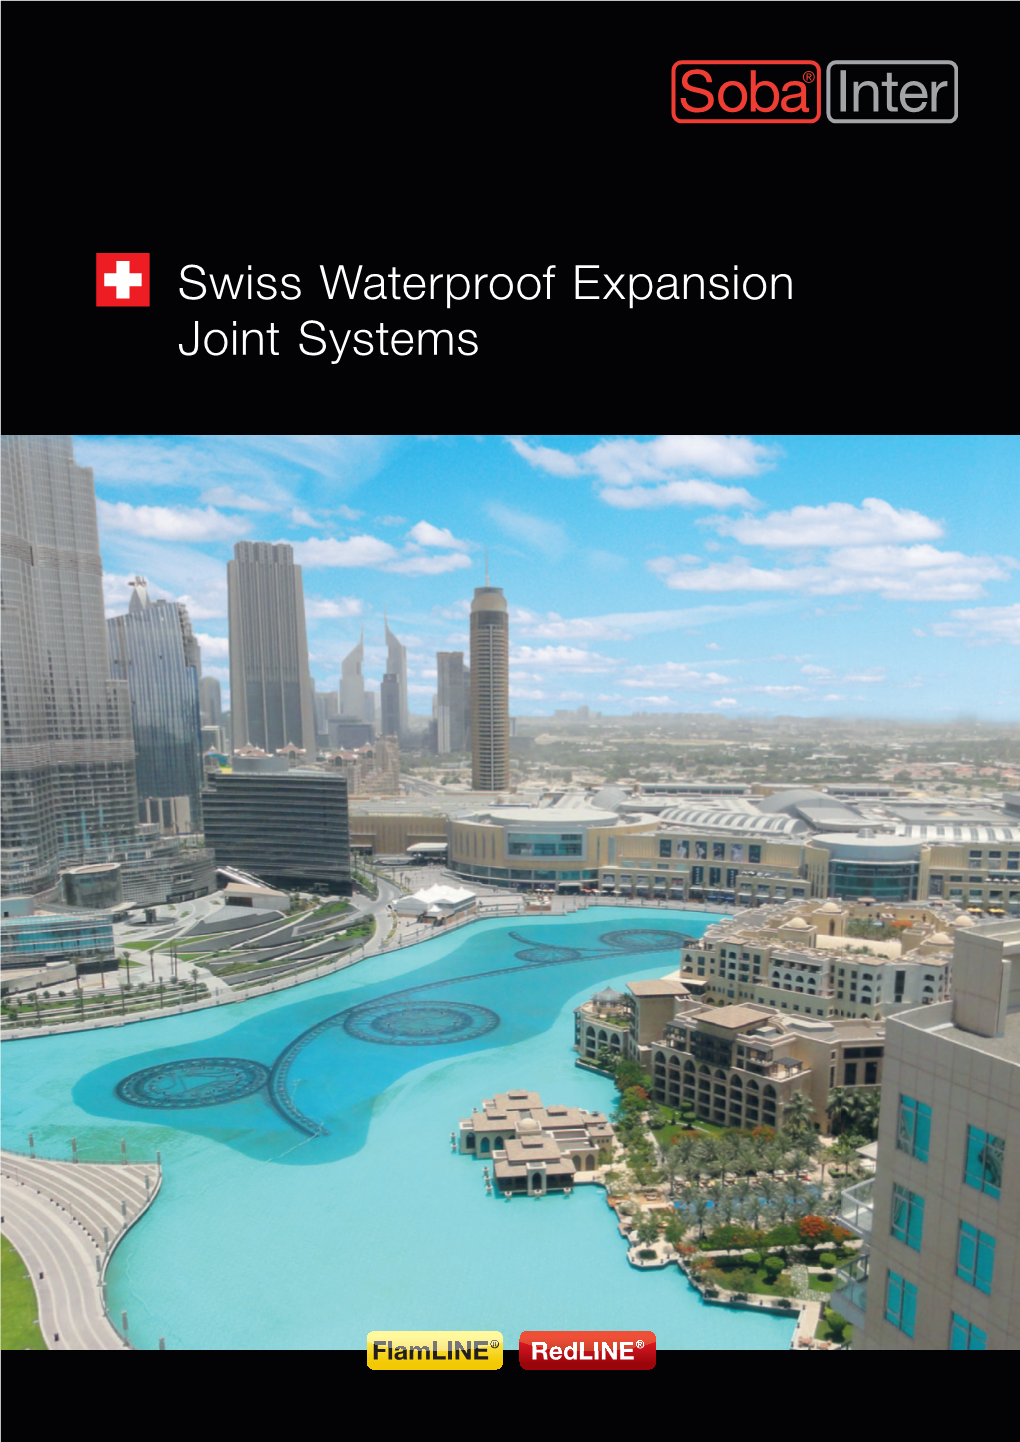 Swiss Waterproof Expansion Joint Systems